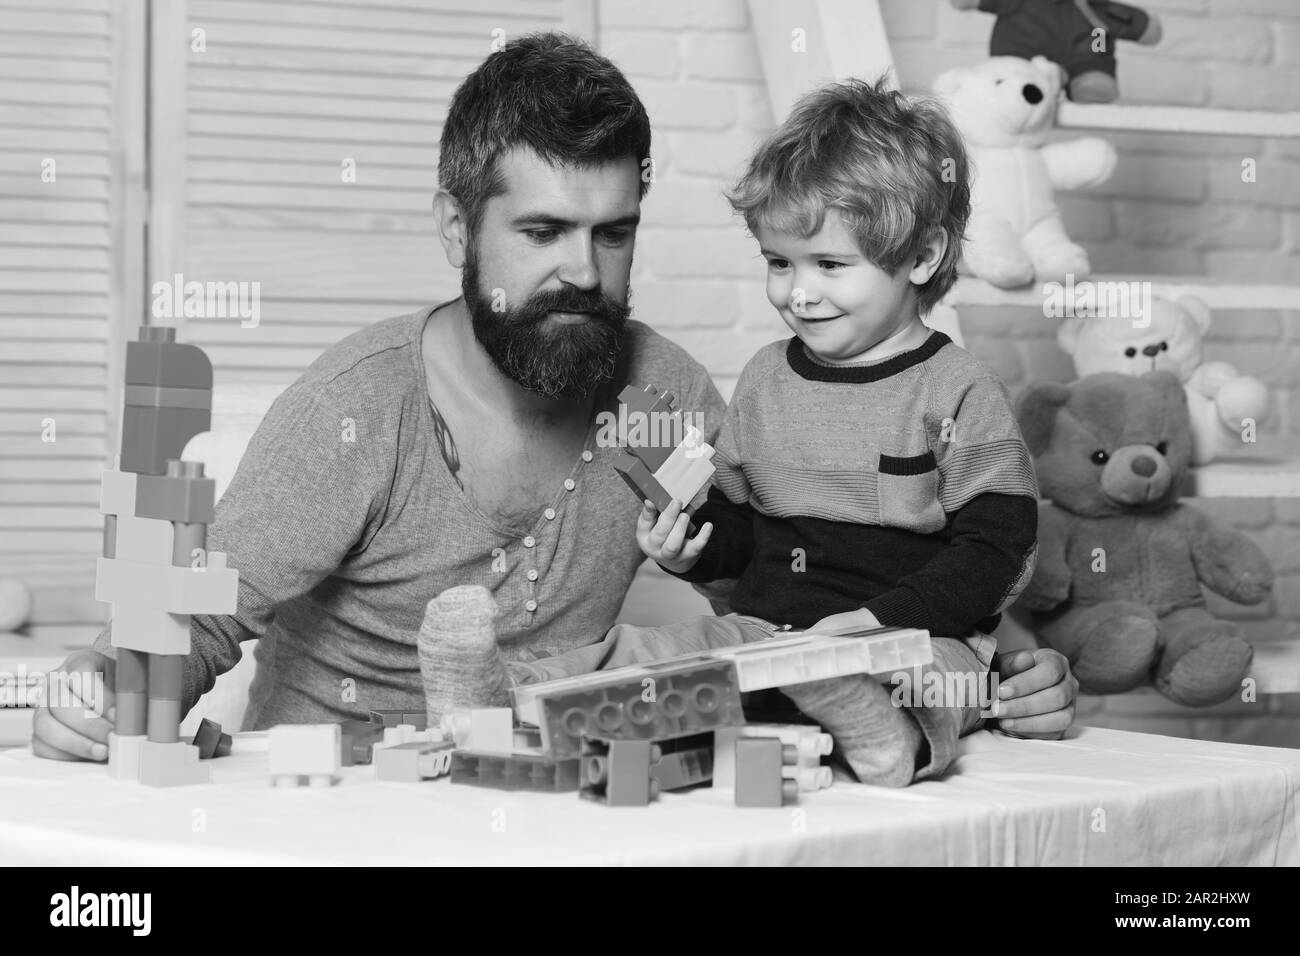 Dad and kid with toys on background build of plastic blocks. Father and son with happy faces create colorful constructions with toy bricks. Family and childhood concept. Man and boy play together Stock Photo